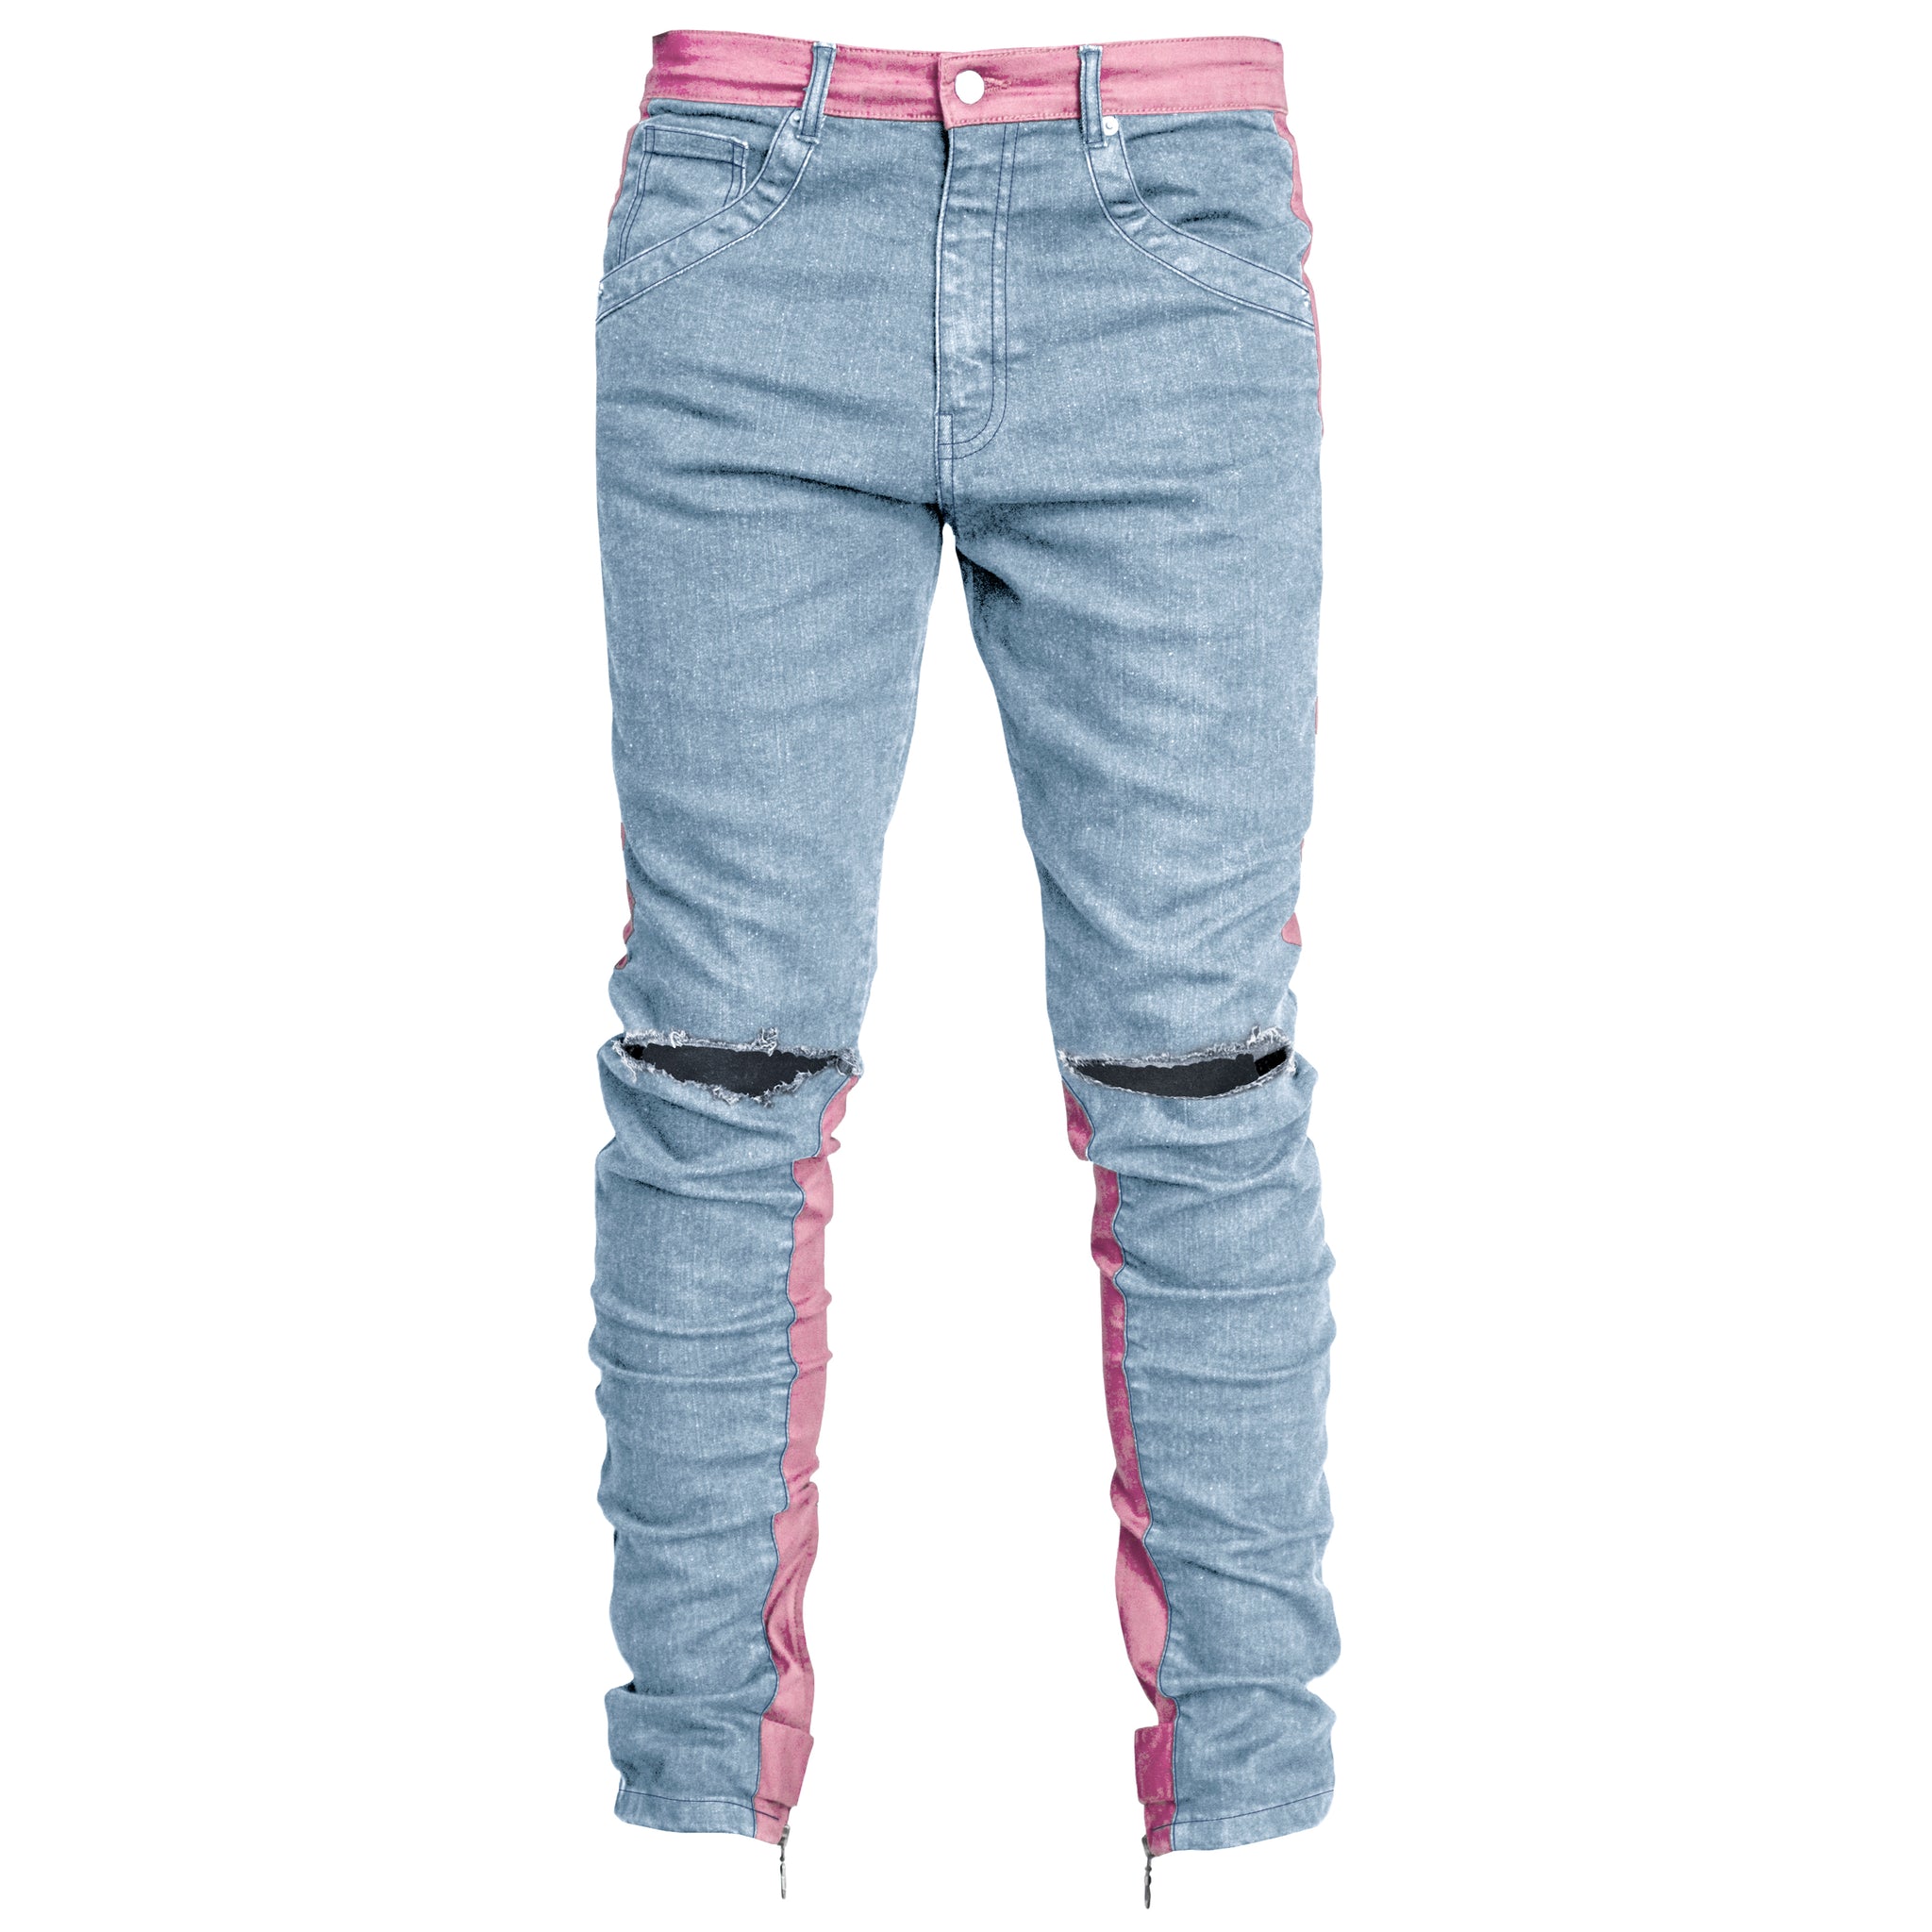 INFORMAL APPAREL Spear Ankle Jeans : Faded Blue/Pink